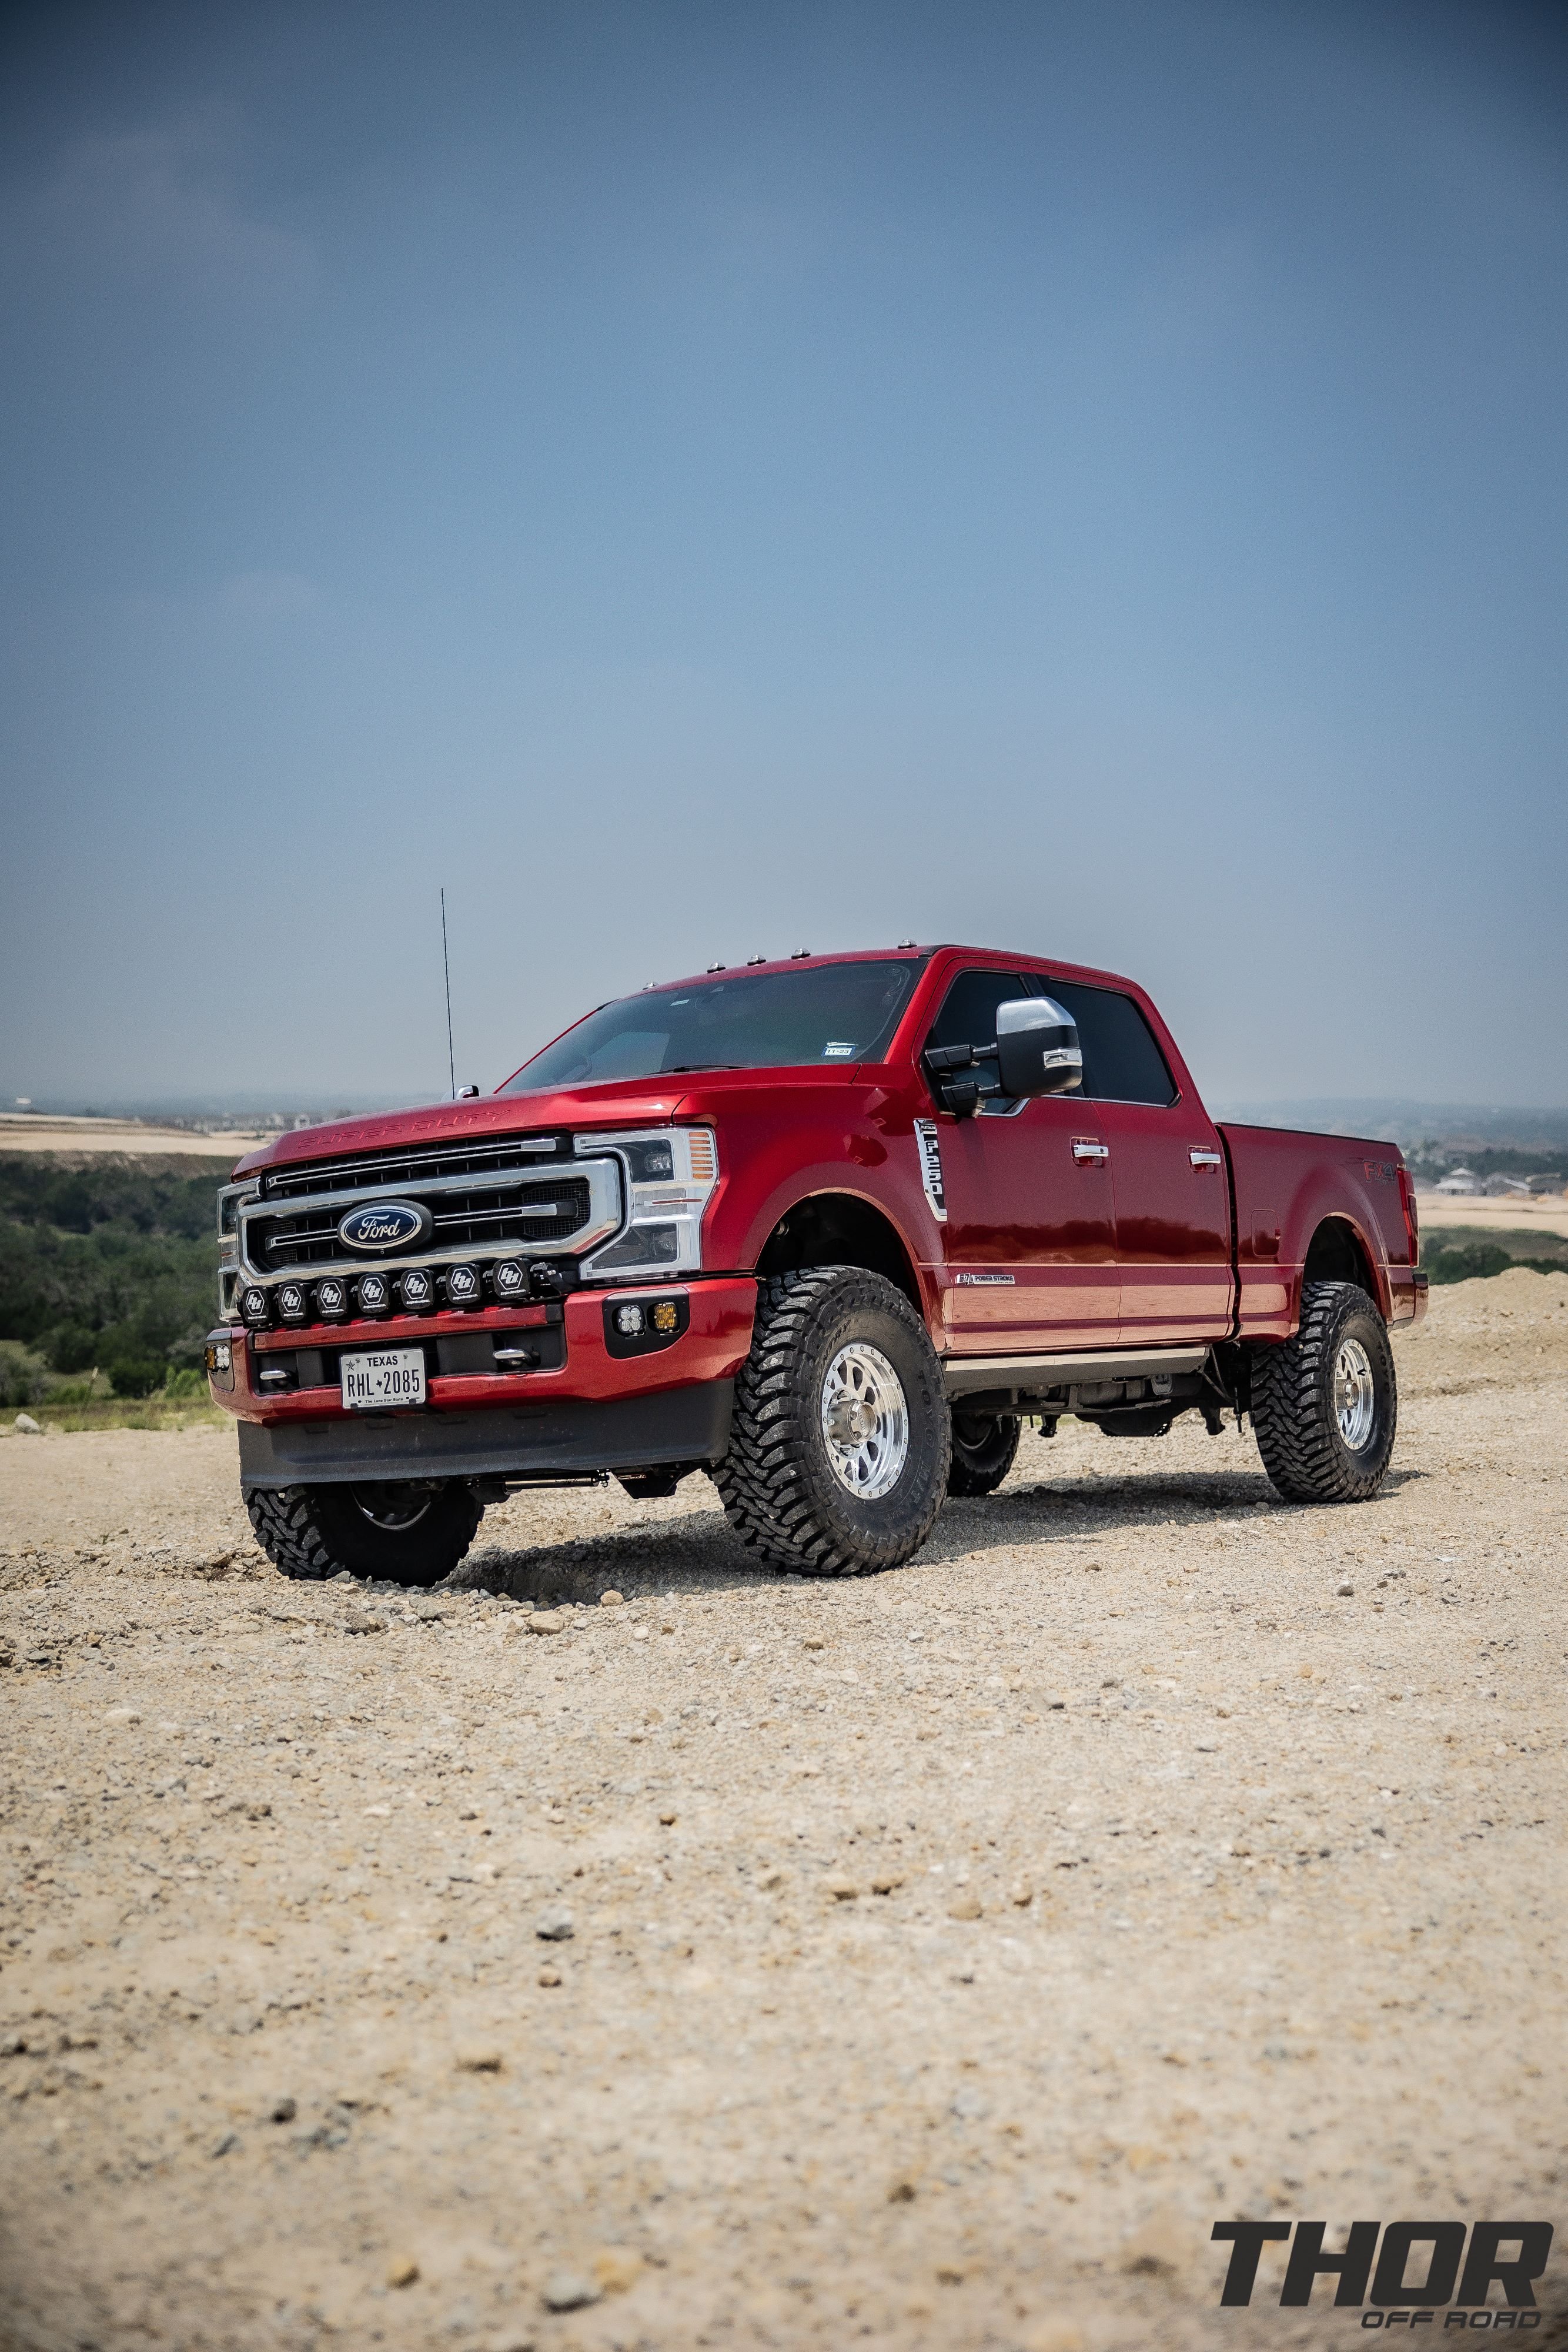 2022 Ford F-250 Super Duty Platinum in Red with Carli Backcountry 3.5" Suspension Kit, Carli 3.5" Fabricated Radius Arms, Carli 3.5" Full Rear Spring Replacement, Carli High Mount Steering Stabilizer, Carli Low Mount Steering Stabilizer, Carli Torsion Sway Bar, Method Racing MR304 17" Machined Wheels, 37x13.50R17 Toyo Open Country Tires, Baja Design Linkable Light Kit, Baja Design Fog Light Pocket Kit, Baja Design S2 Flush Mount Lights, Banks Differential Cover, Banks Exhaust Kit